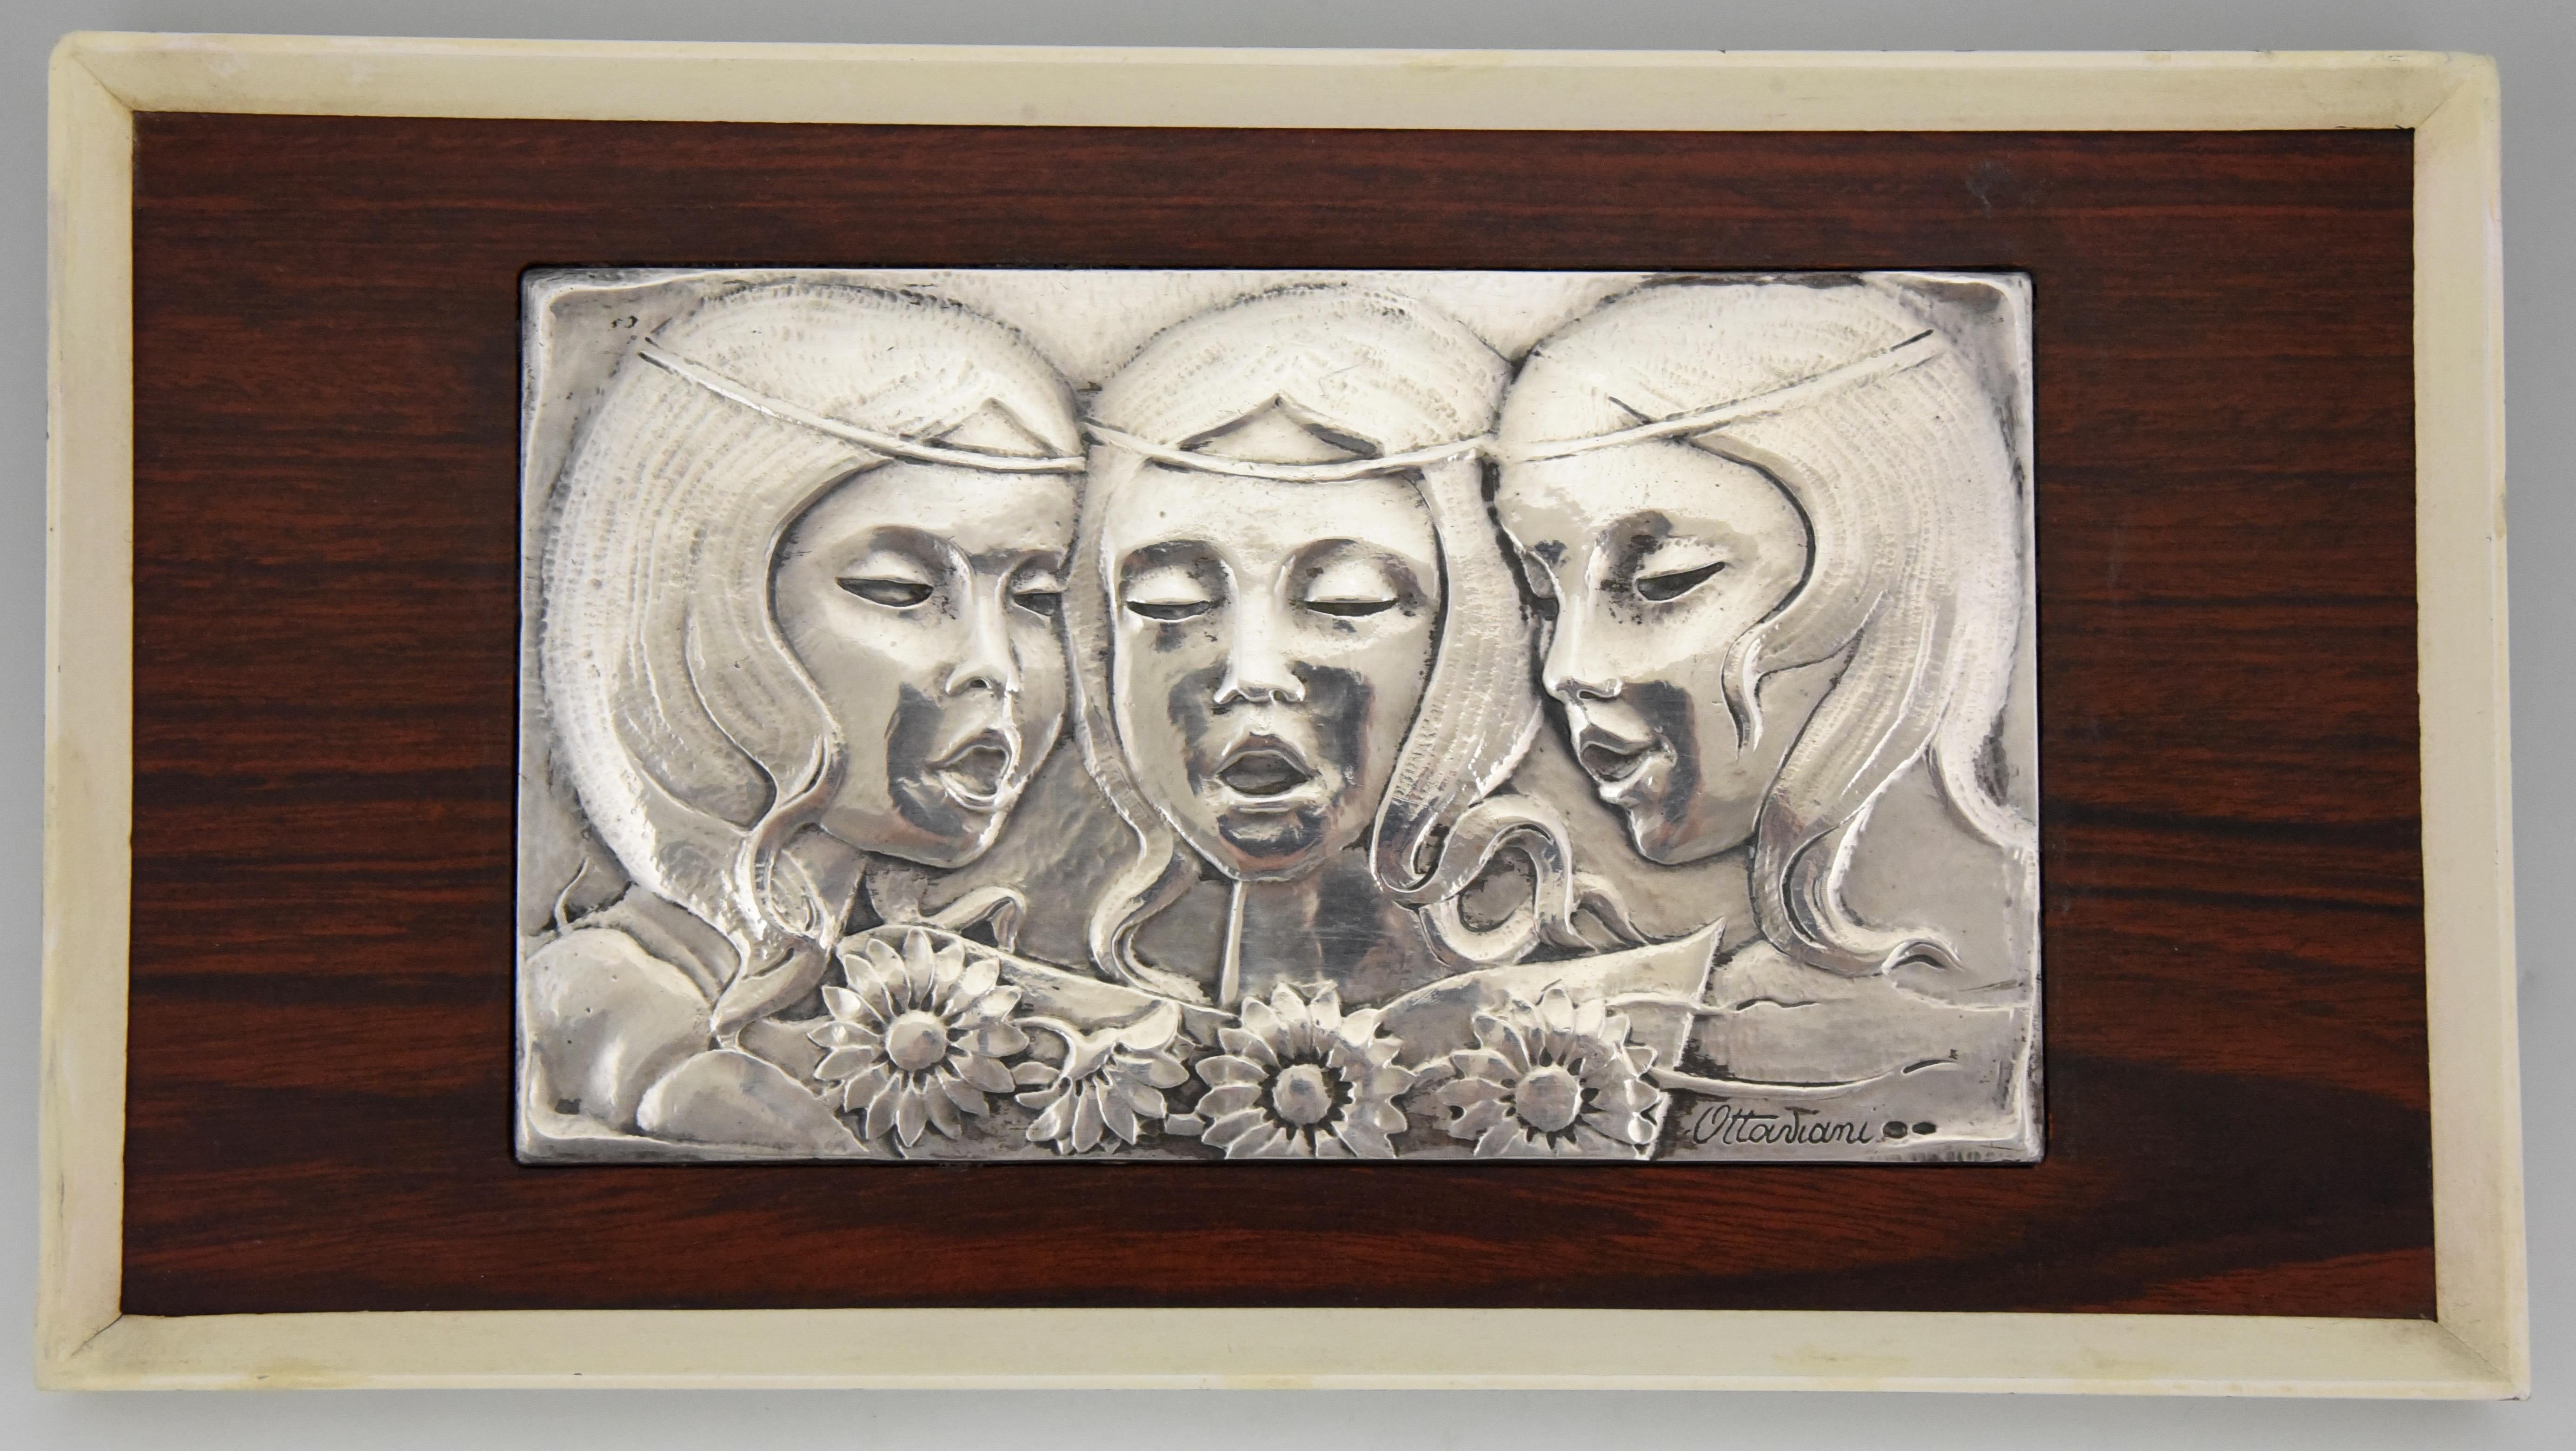 Lovely Mid Century Sterling silver wall panel 3 singing girls with flowers. Signed by the Italian silversmith Ottaviani, 1960. 
Ottaviani (1945) is a jewelry and silver firm located in the small seaside town of Recanati, Italy. They had a